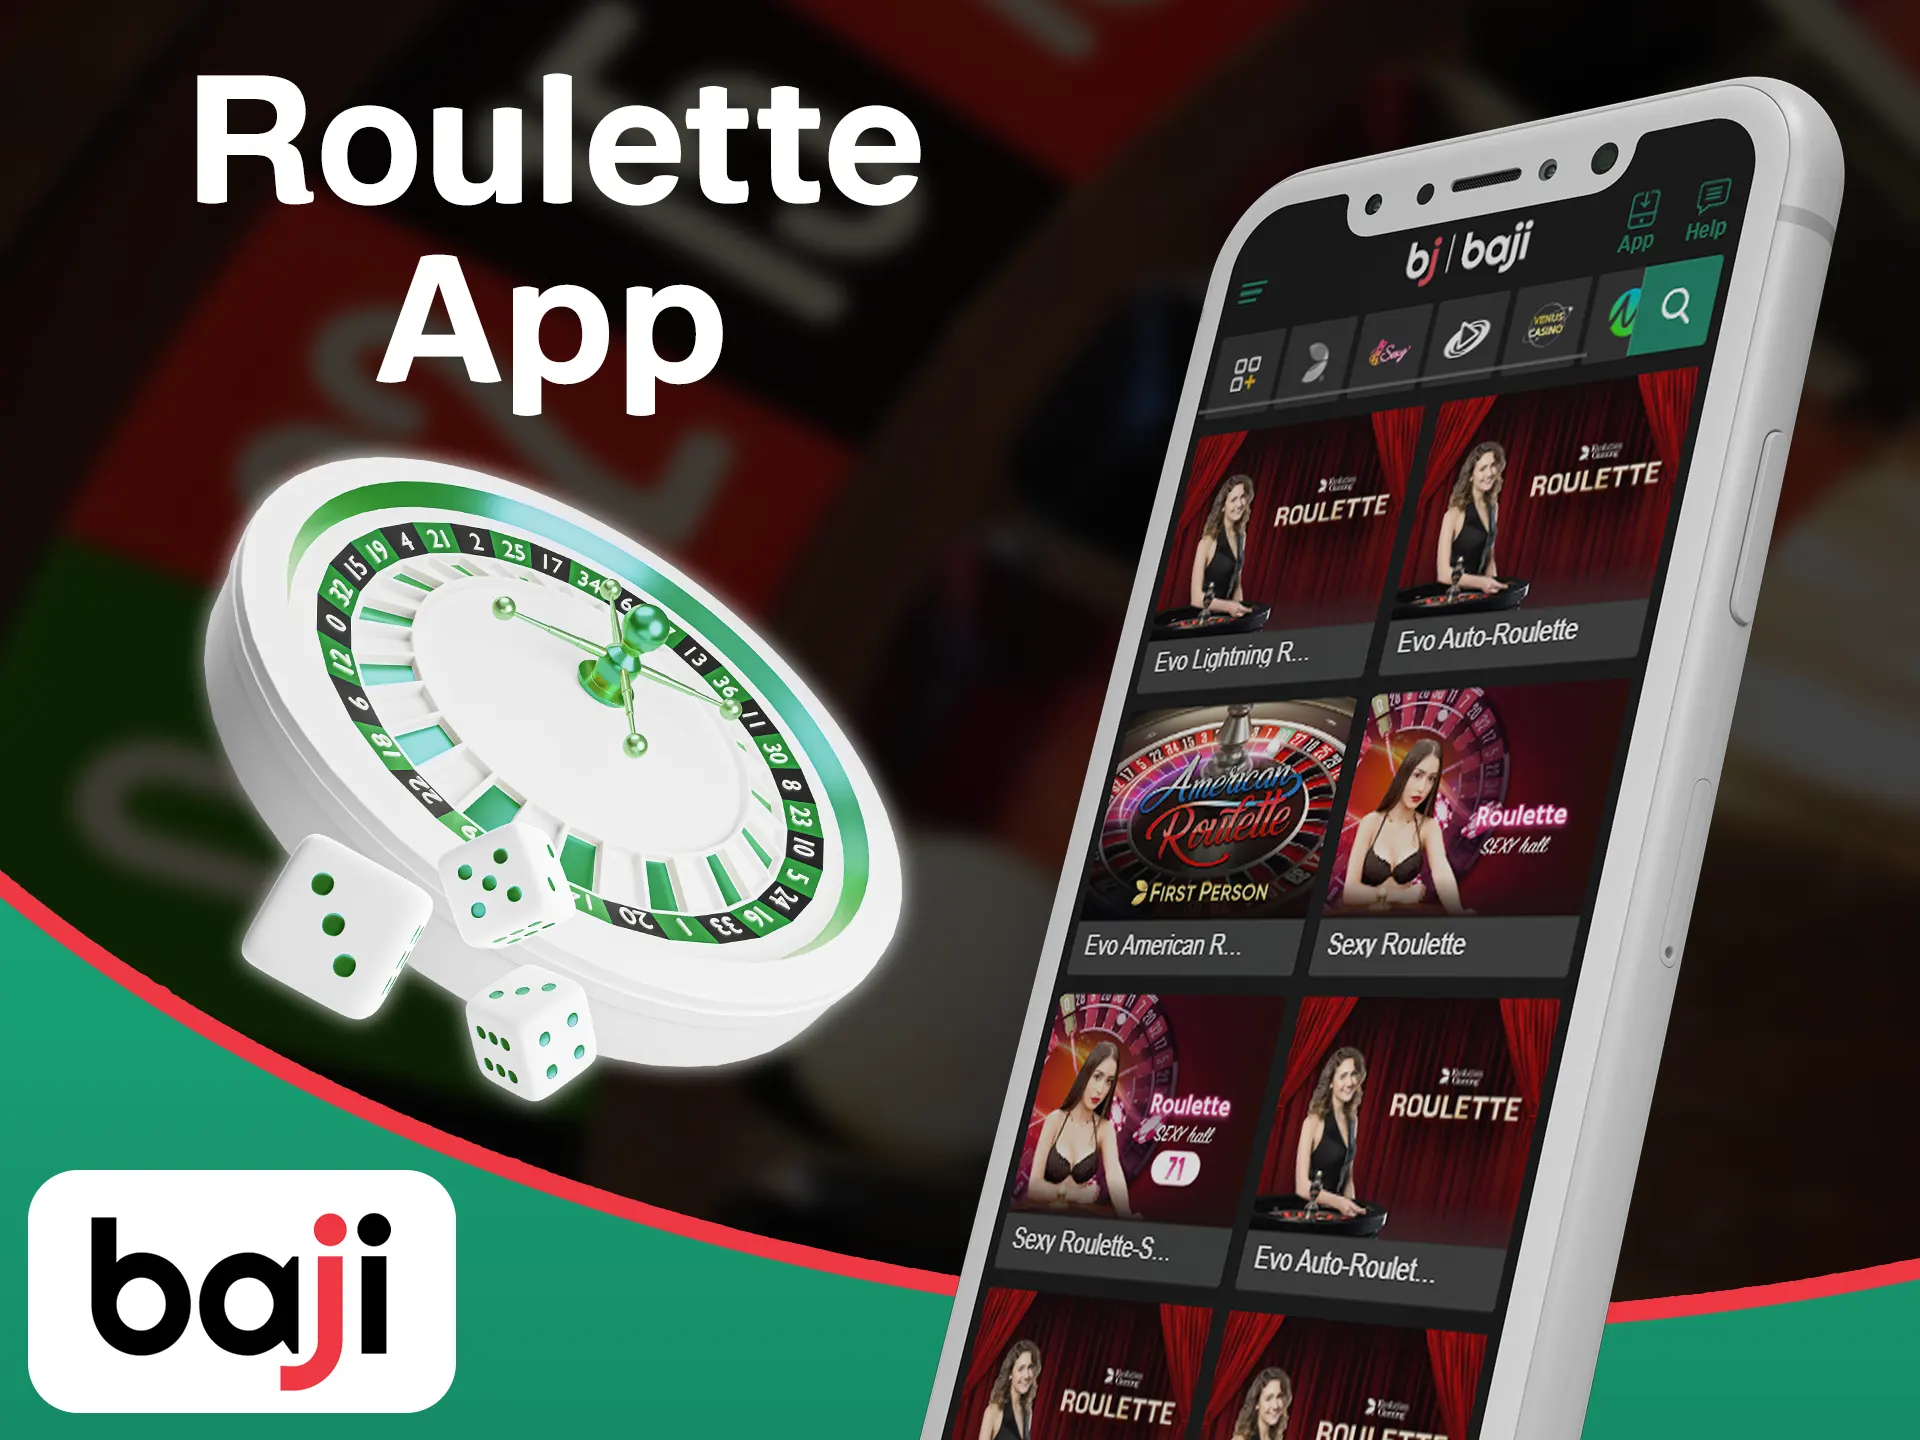 Spin roulettes with comfort in the Baji app.